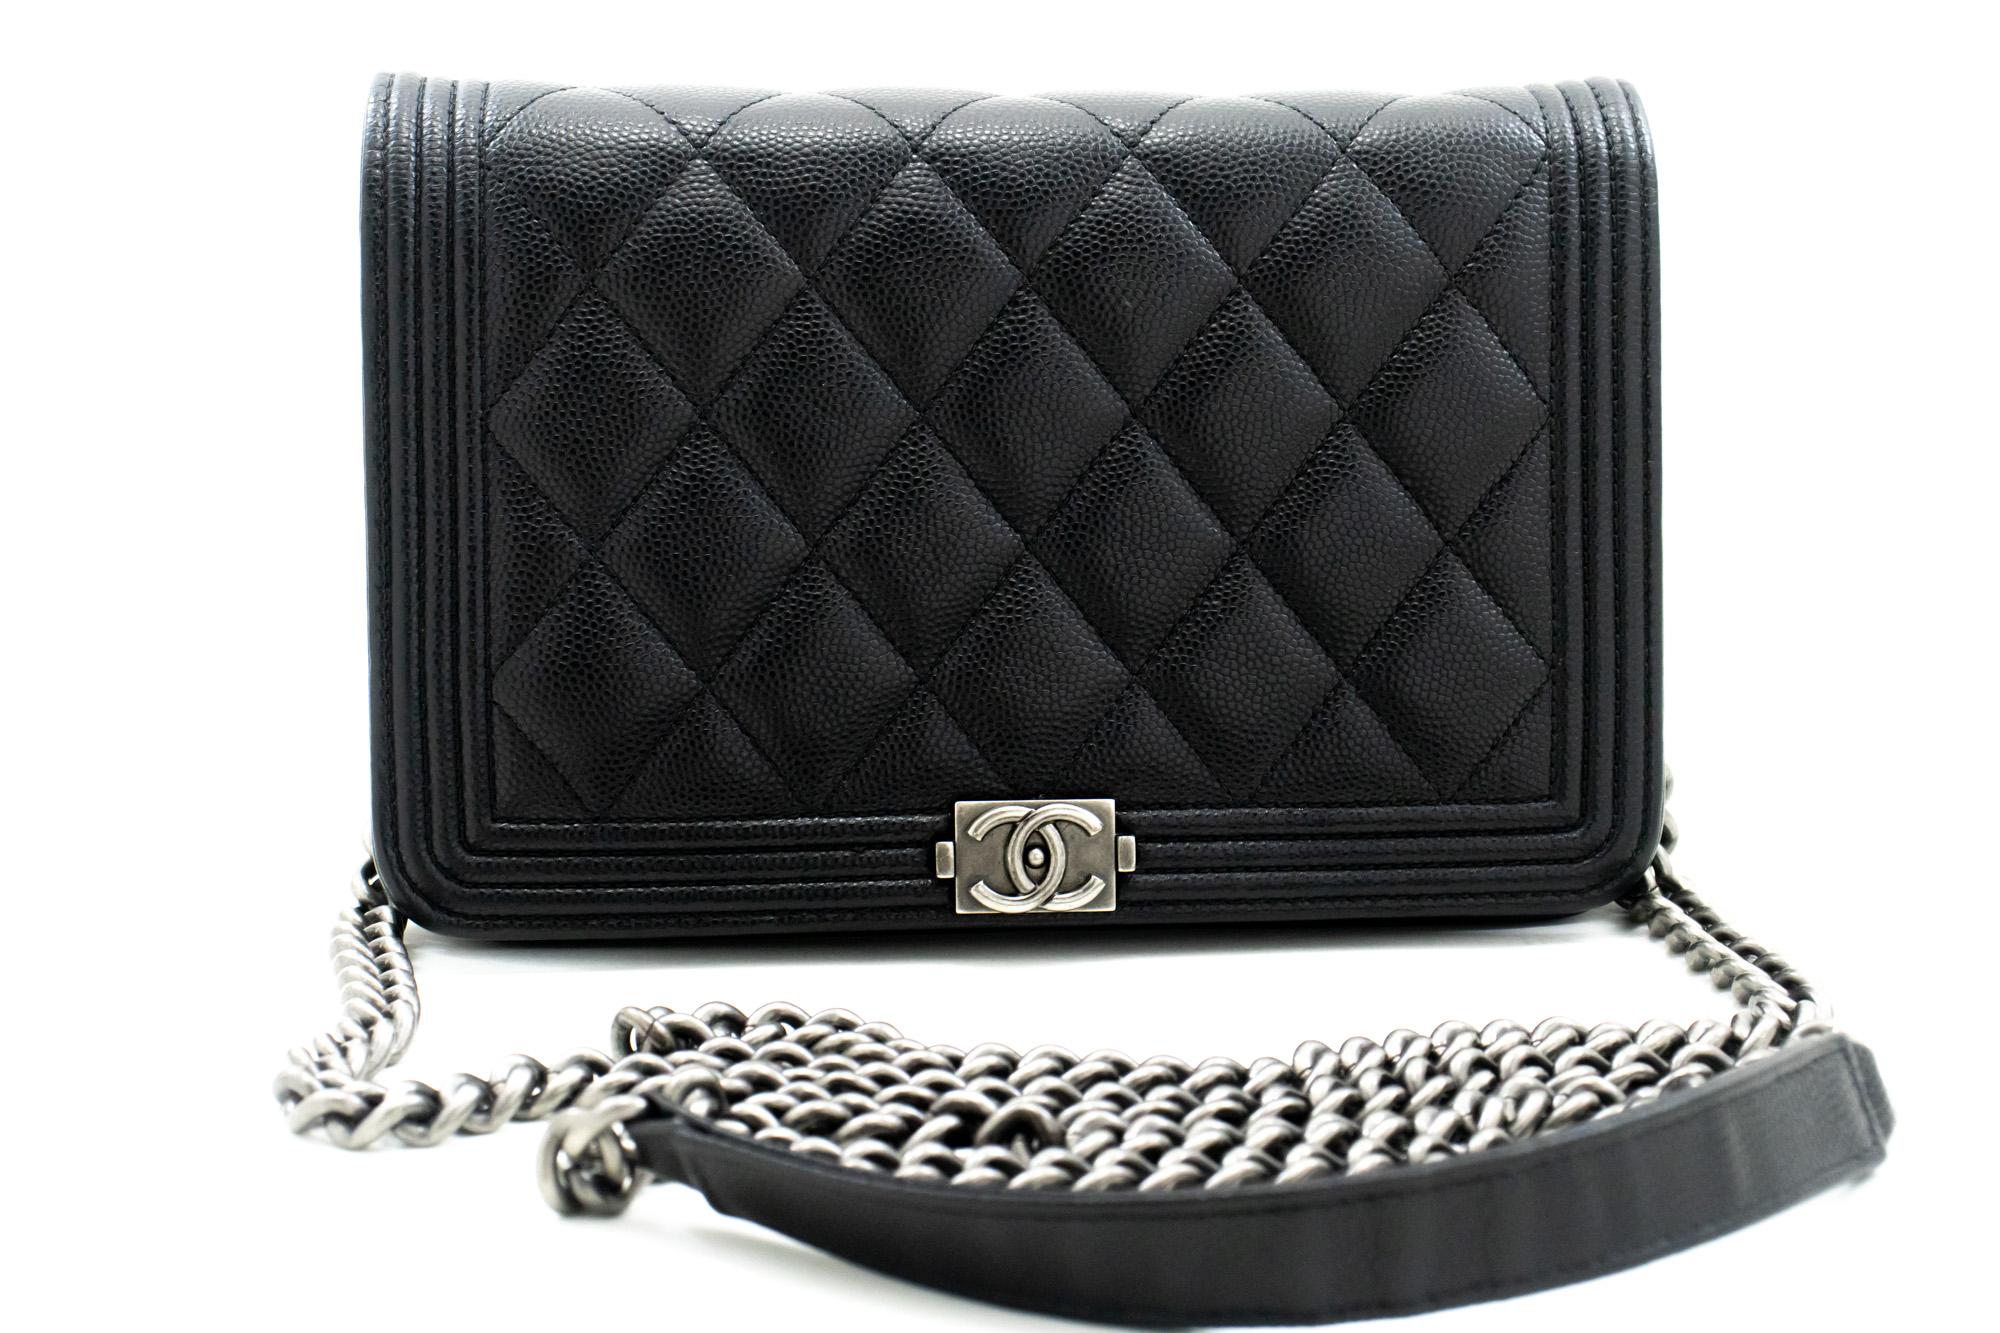 An authentic CHANEL Boy Black Caviar Wallet On Chain WOC Flap Shoulder Bag Silver. The color is Black. The outside material is Leather. The pattern is Solid. This item is Contemporary. The year of manufacture would be 1986.
Conditions &